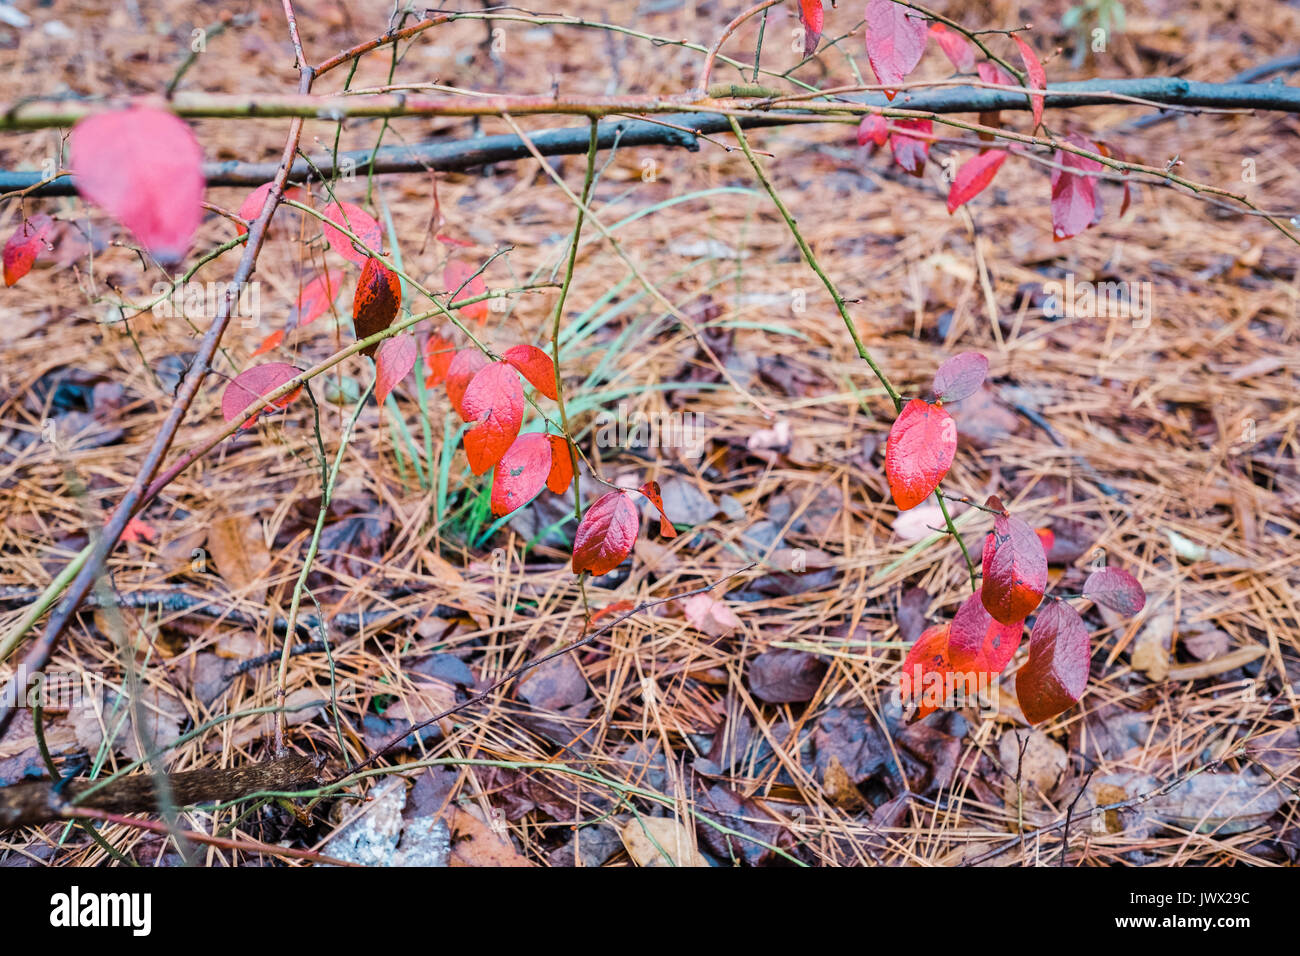 A variety of low growing forest floor plants changing color during autumn season. Stock Photo